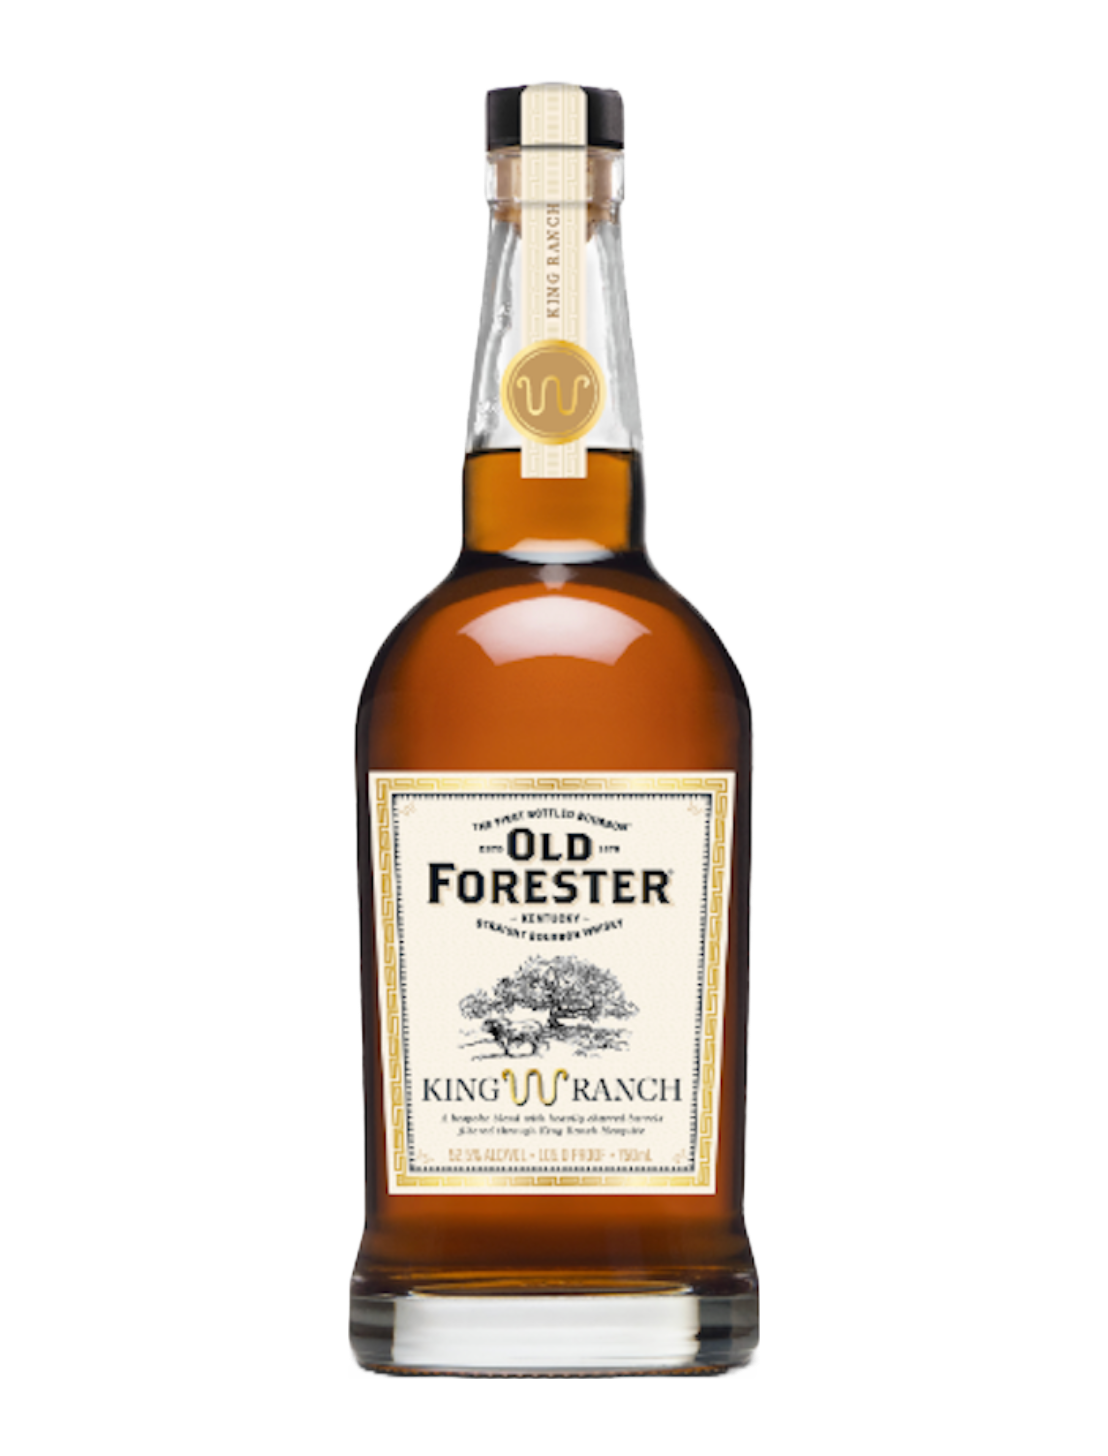 An elegant bottle of Old Forester King Ranch Edition in frot of a plain white background